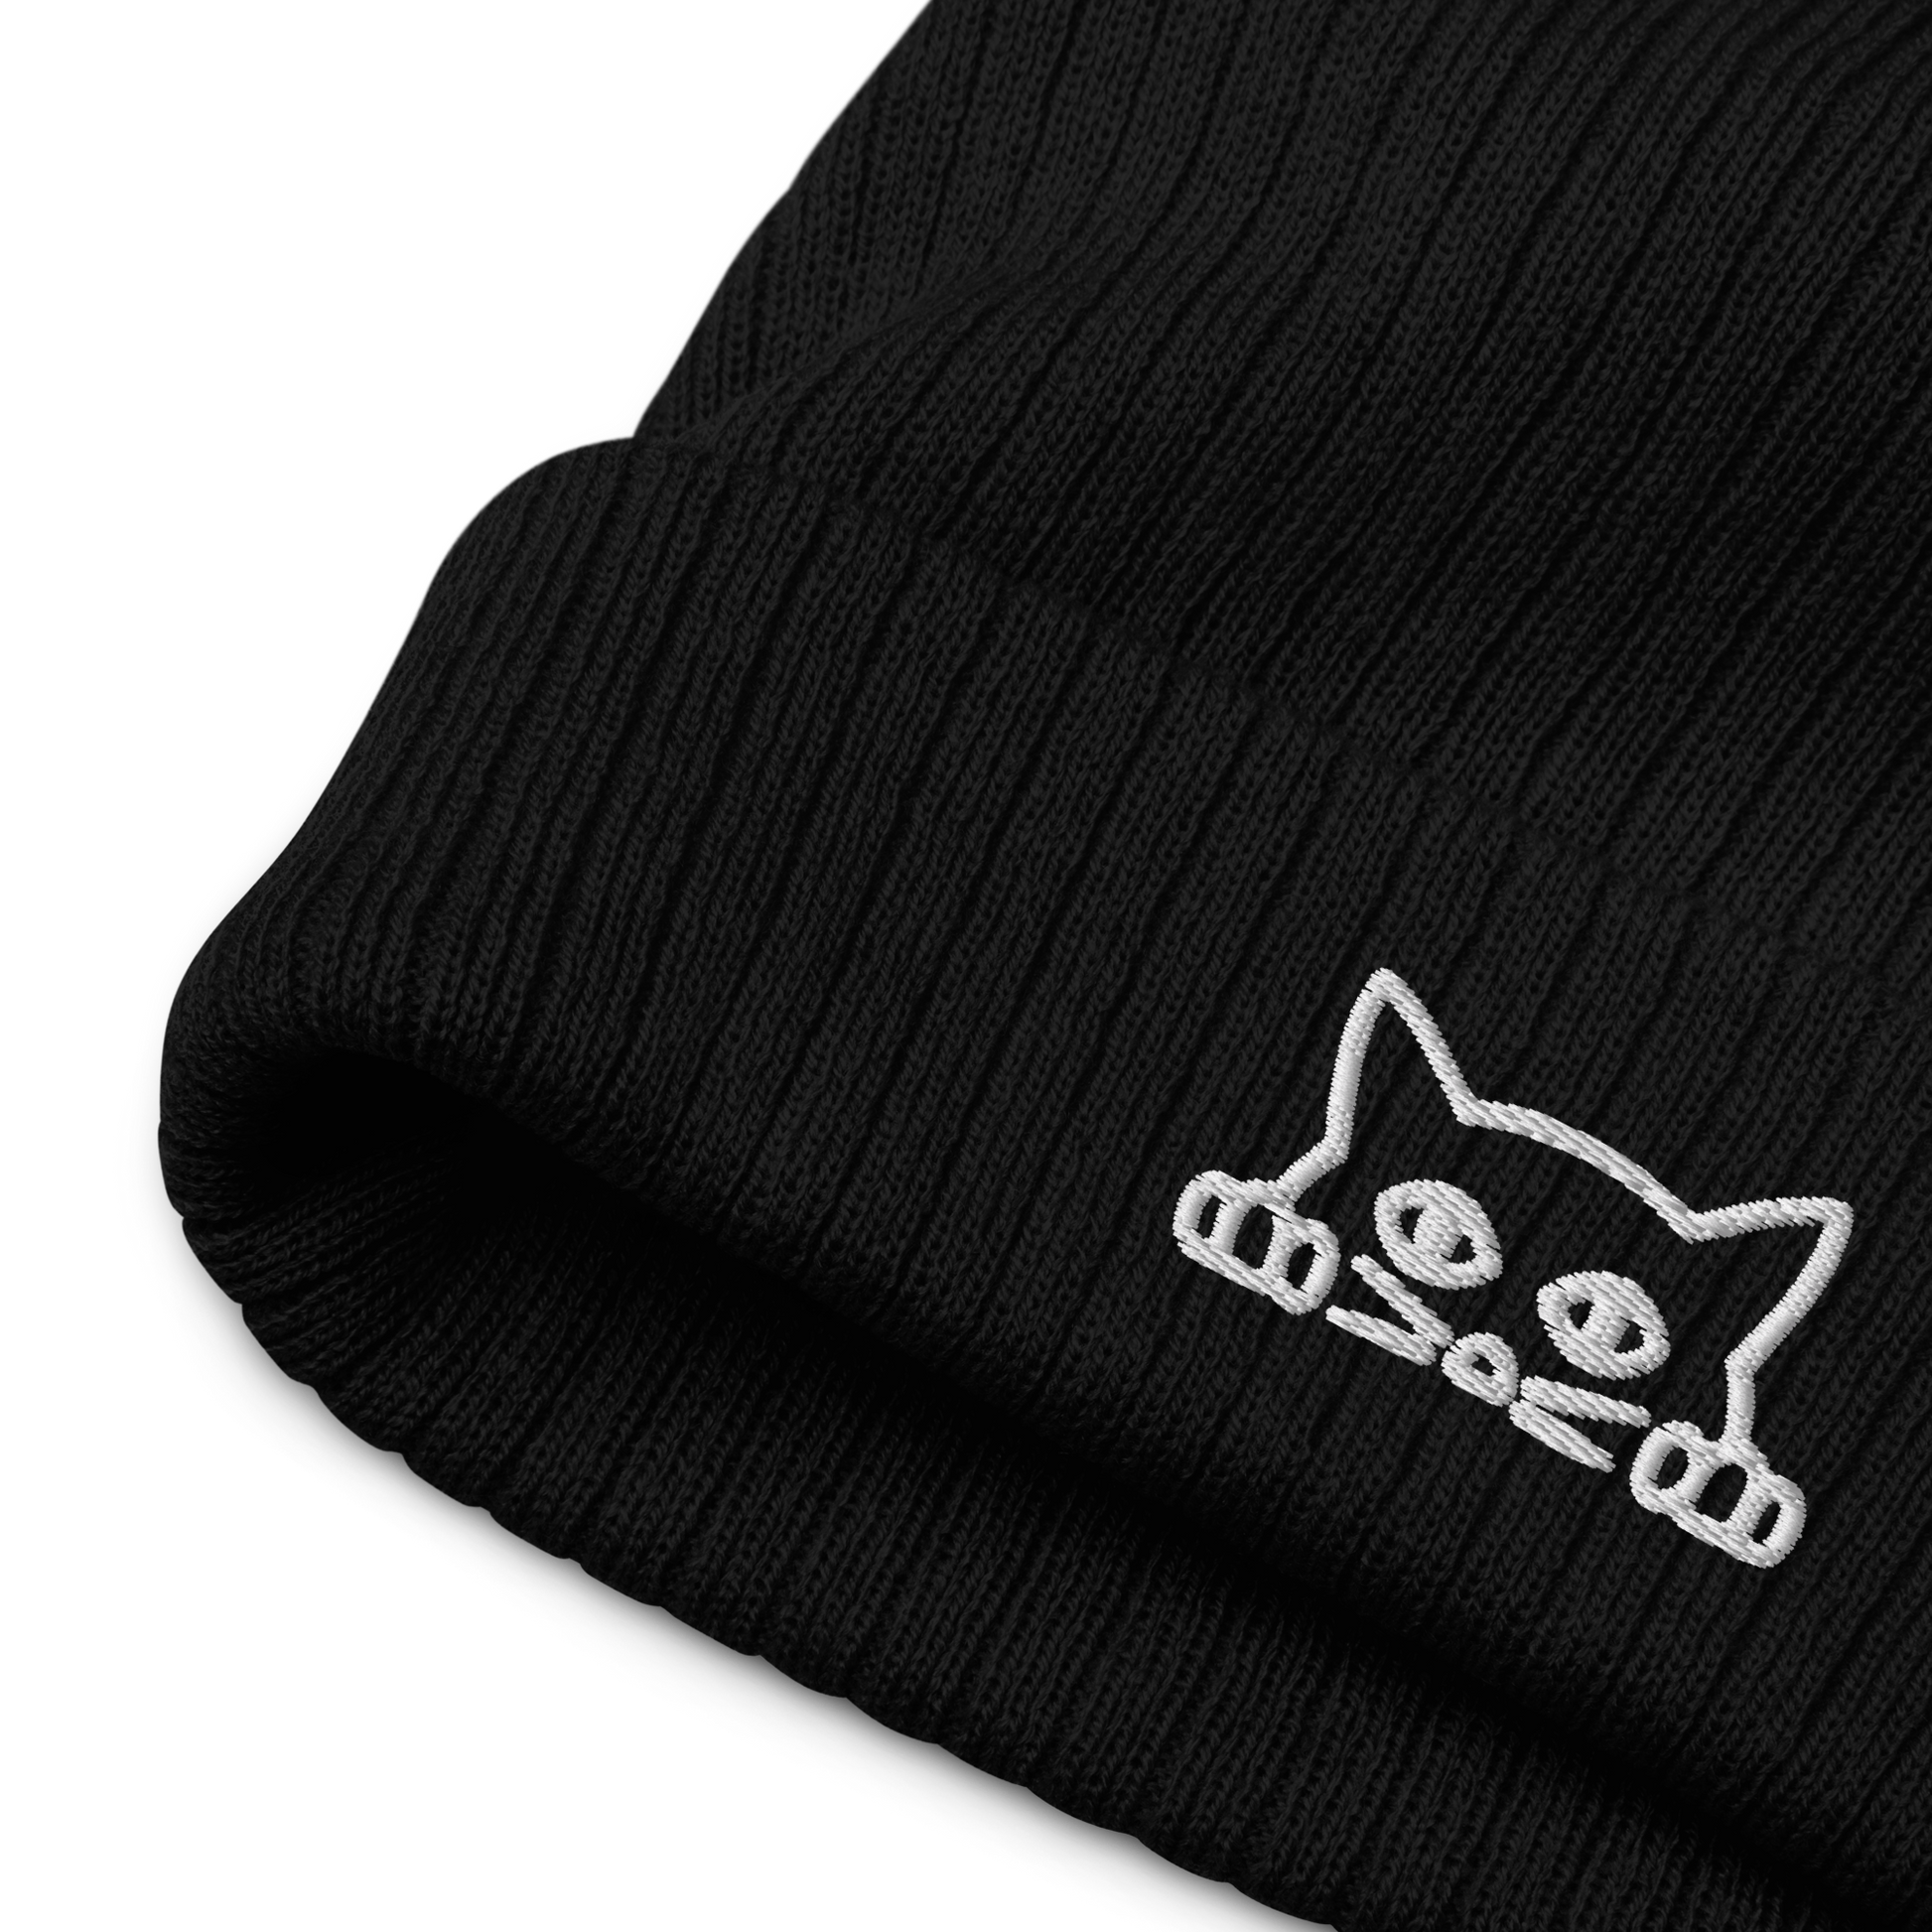 Front details of a Black Ribbed Knit Cat Beanie Featuring A Charming Peeking Cat Embroidery On The Fold - Shop Cool Winter Beanies Online - Boozy Fox